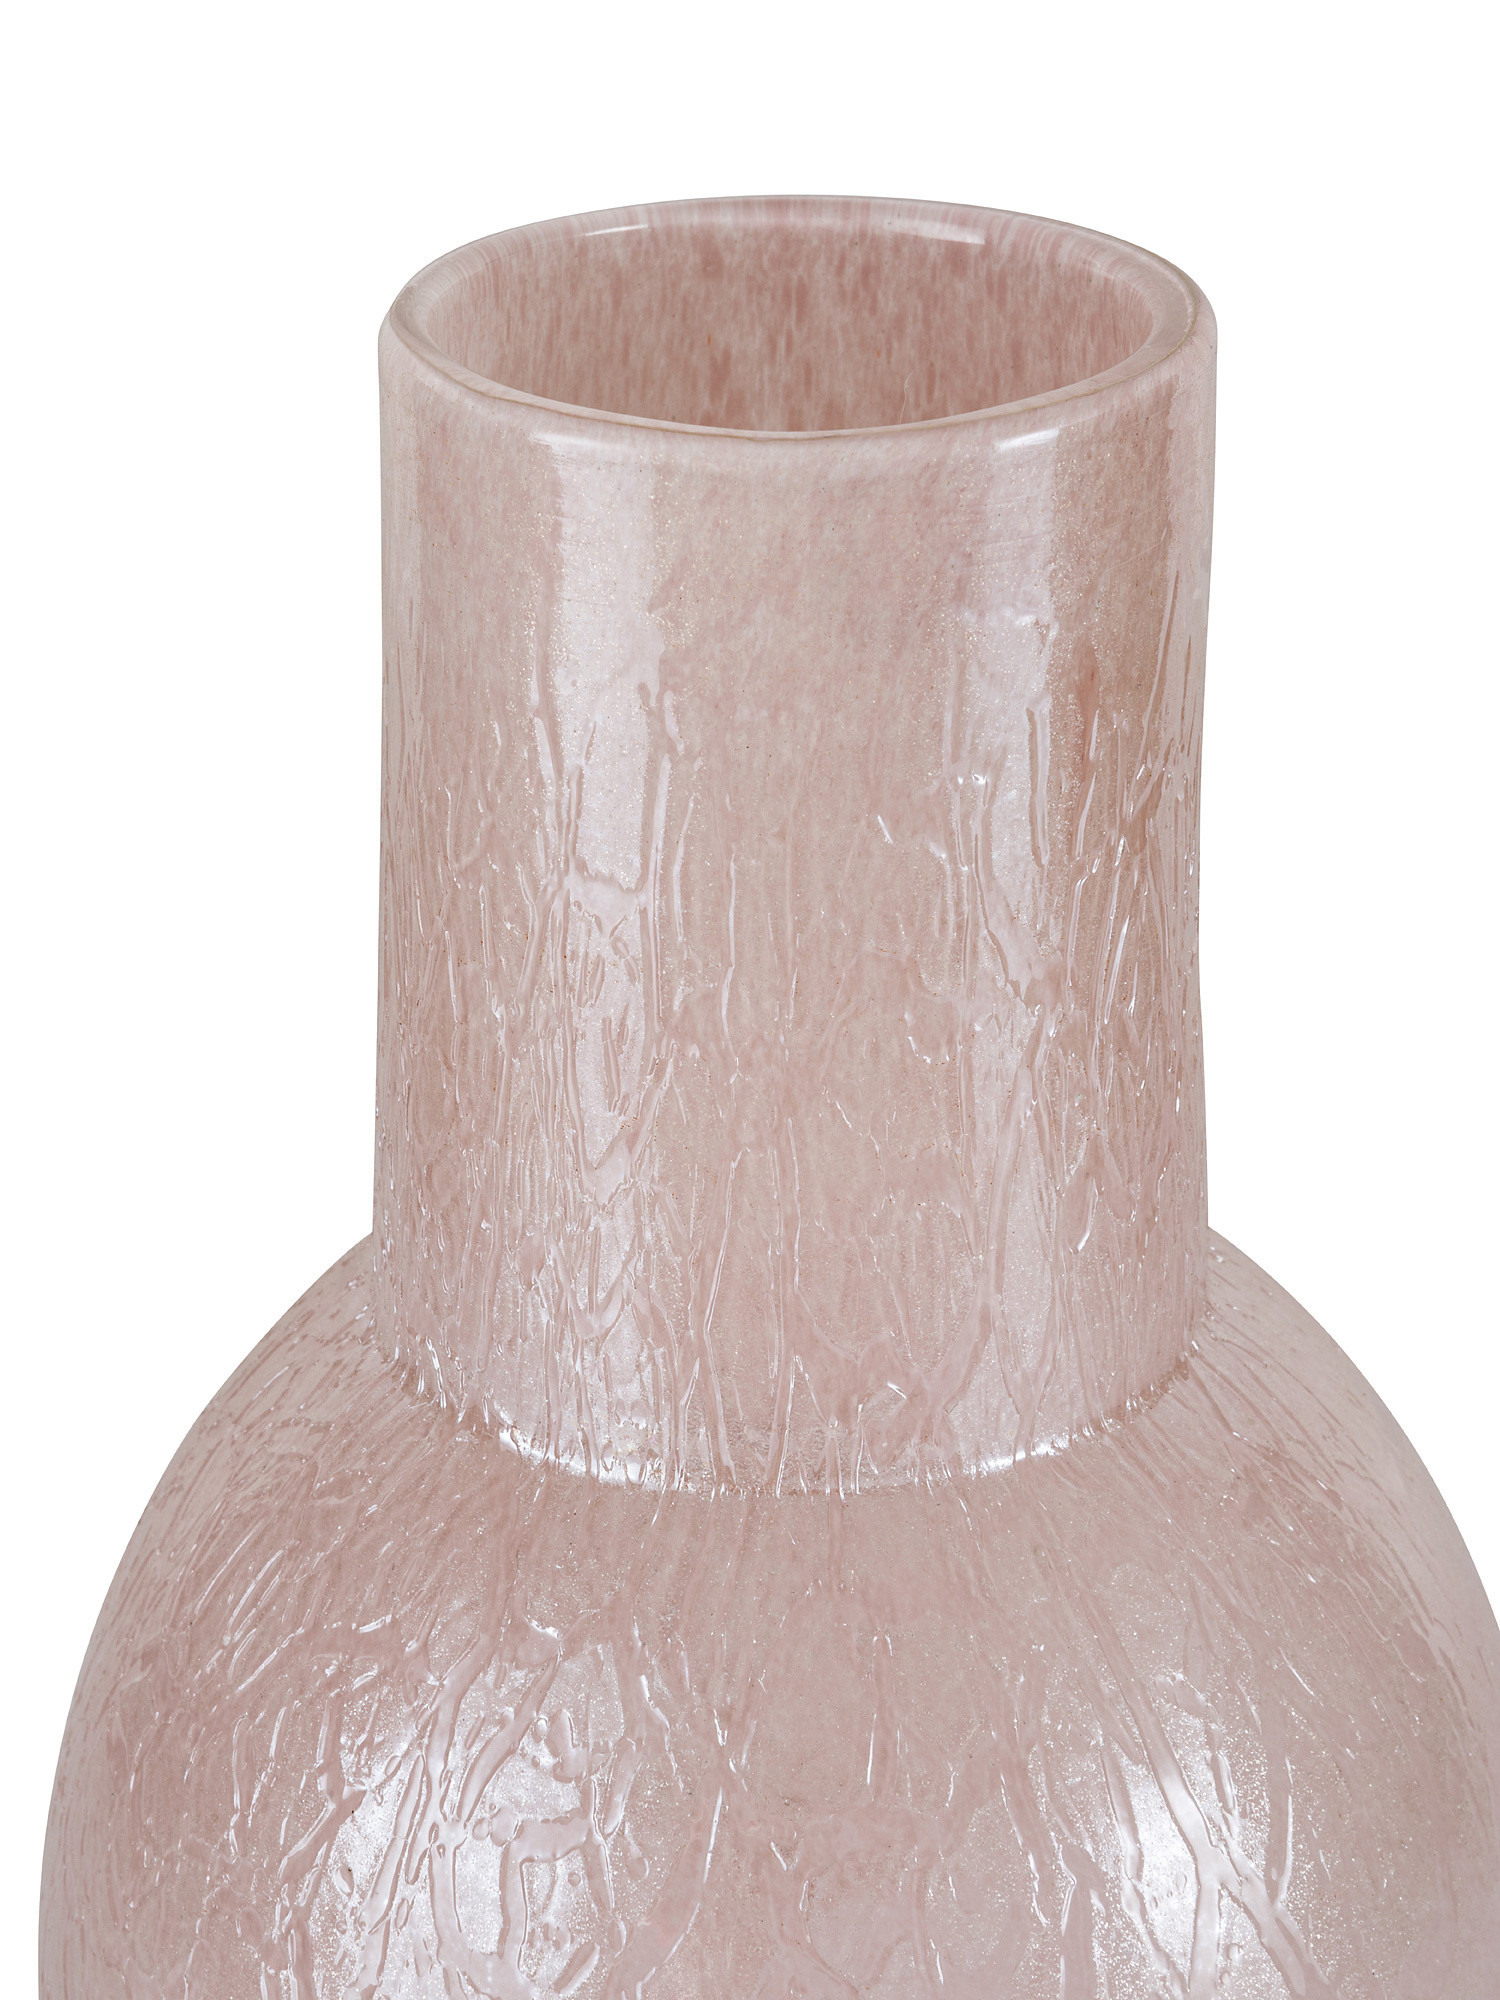 Colored paste glass vase, Grey, large